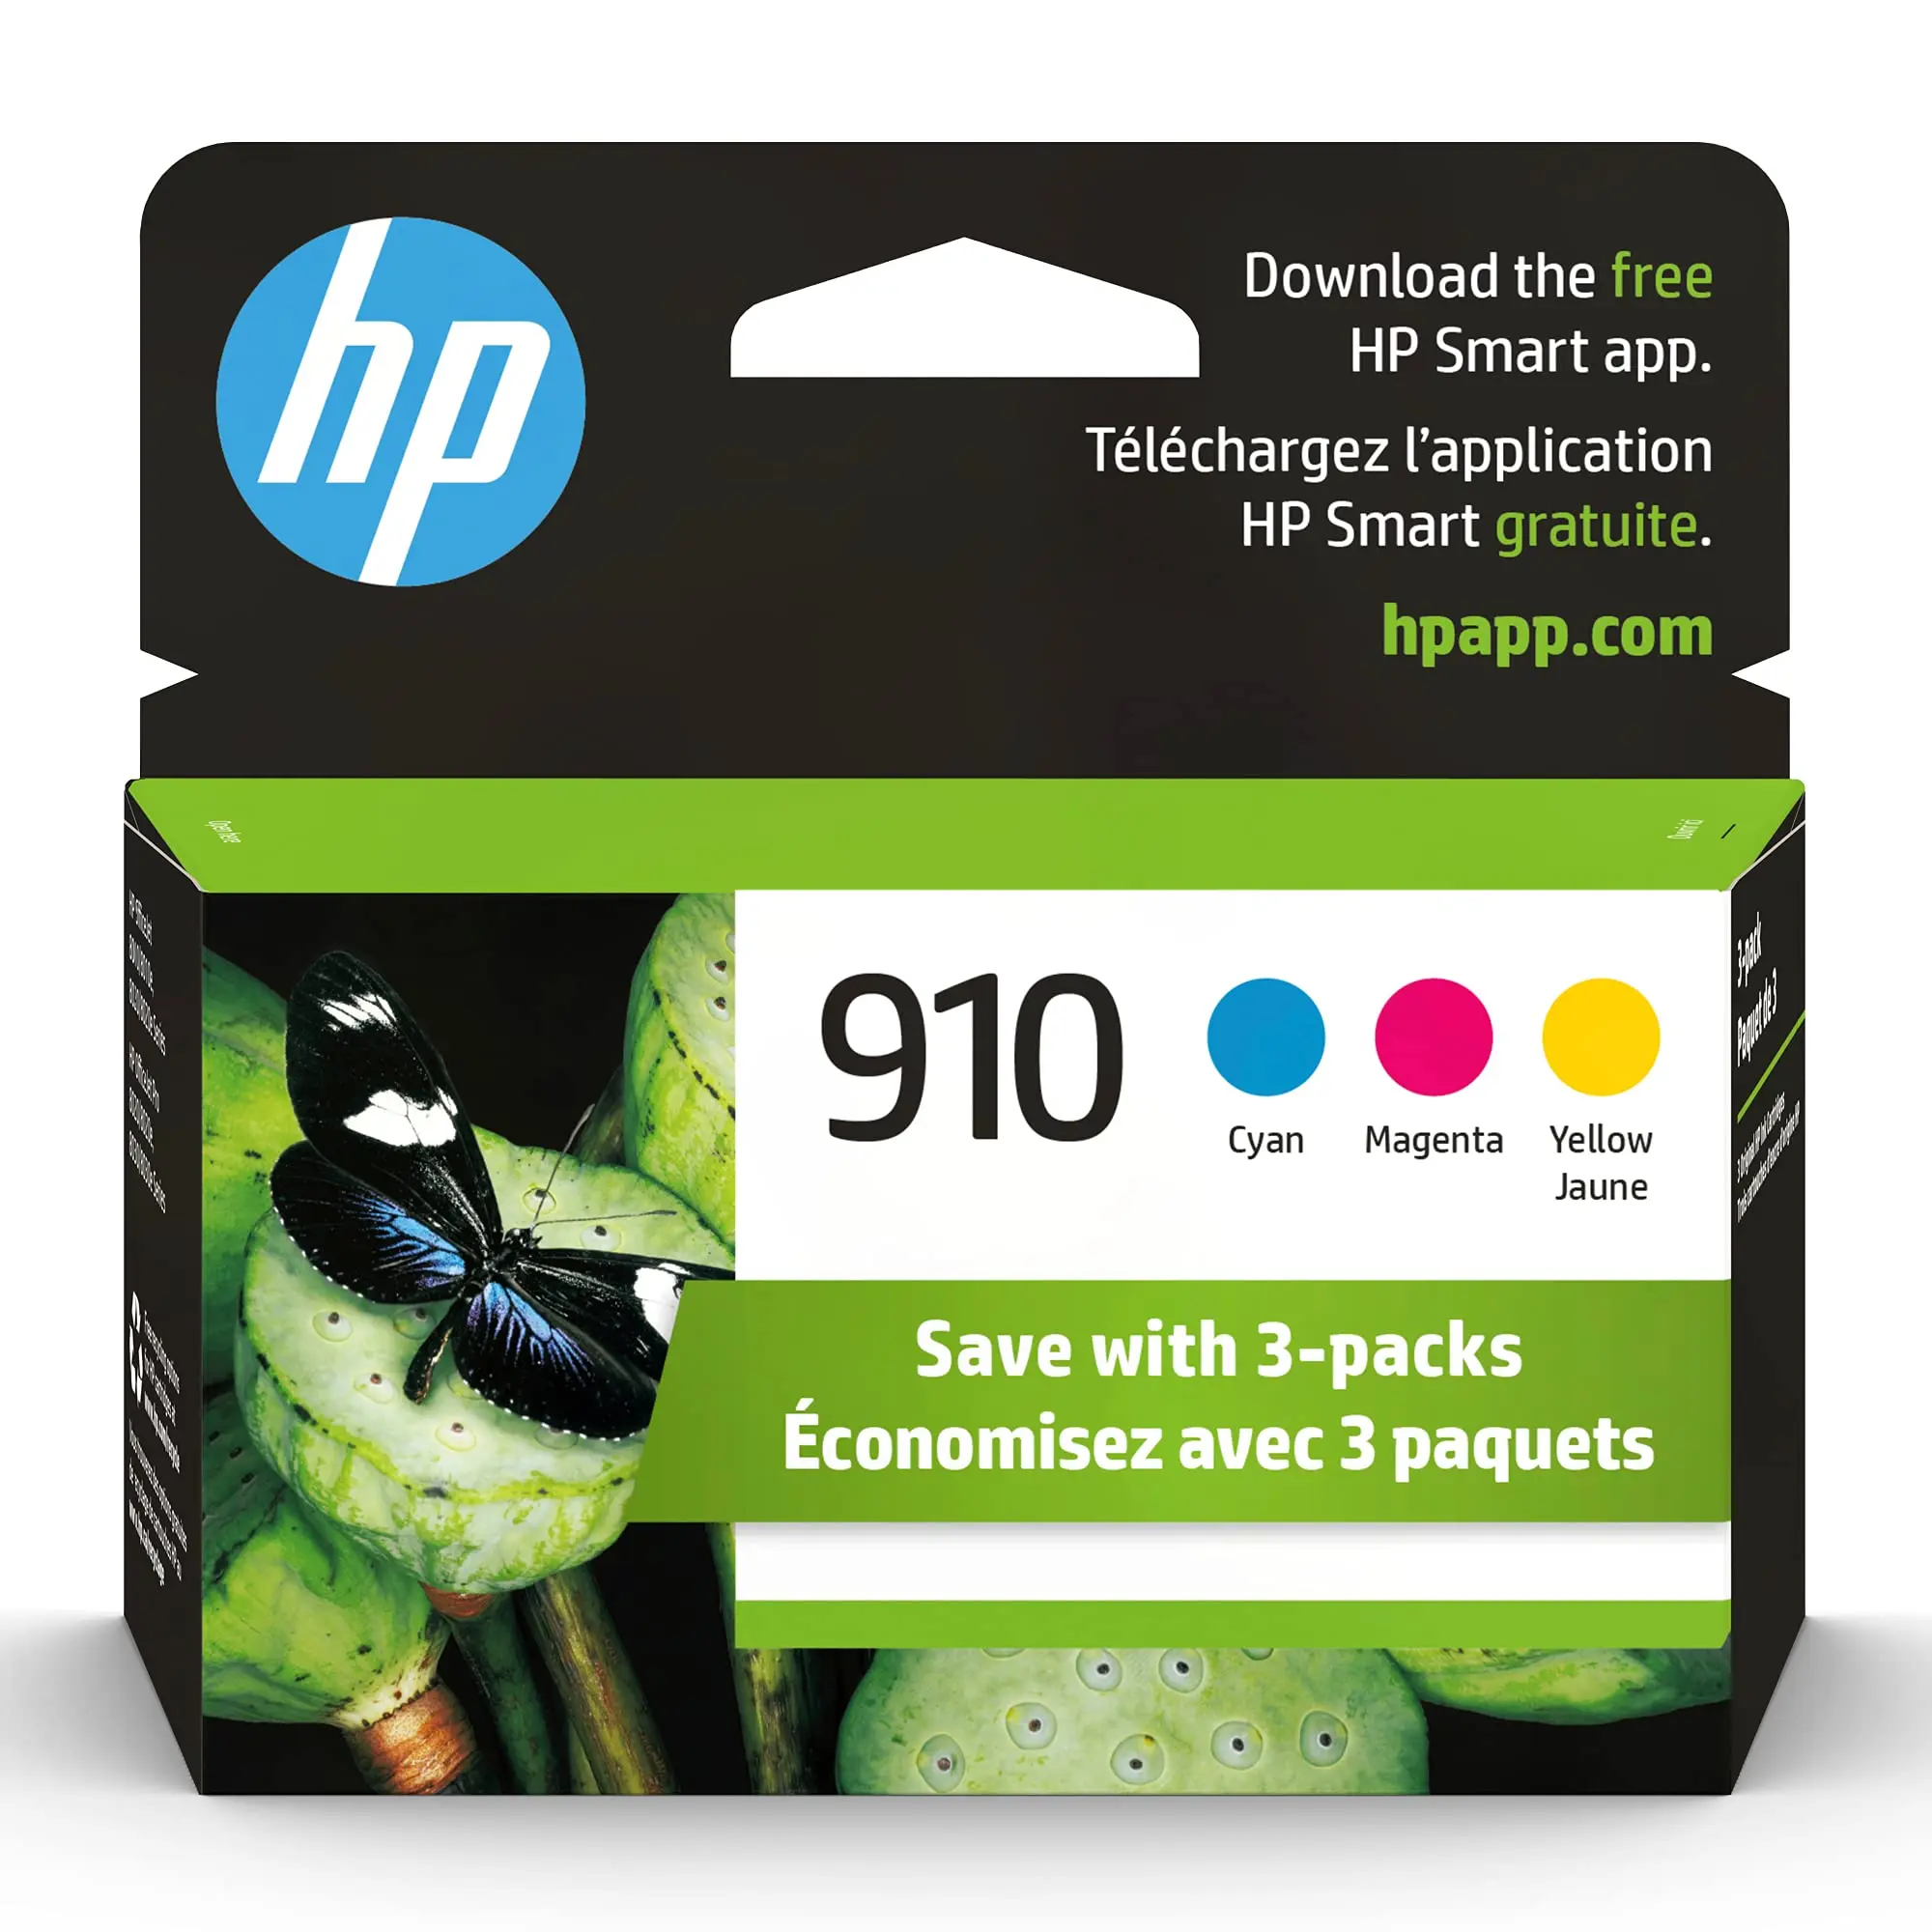 Hp 910 ink cartridges: everything you need to know